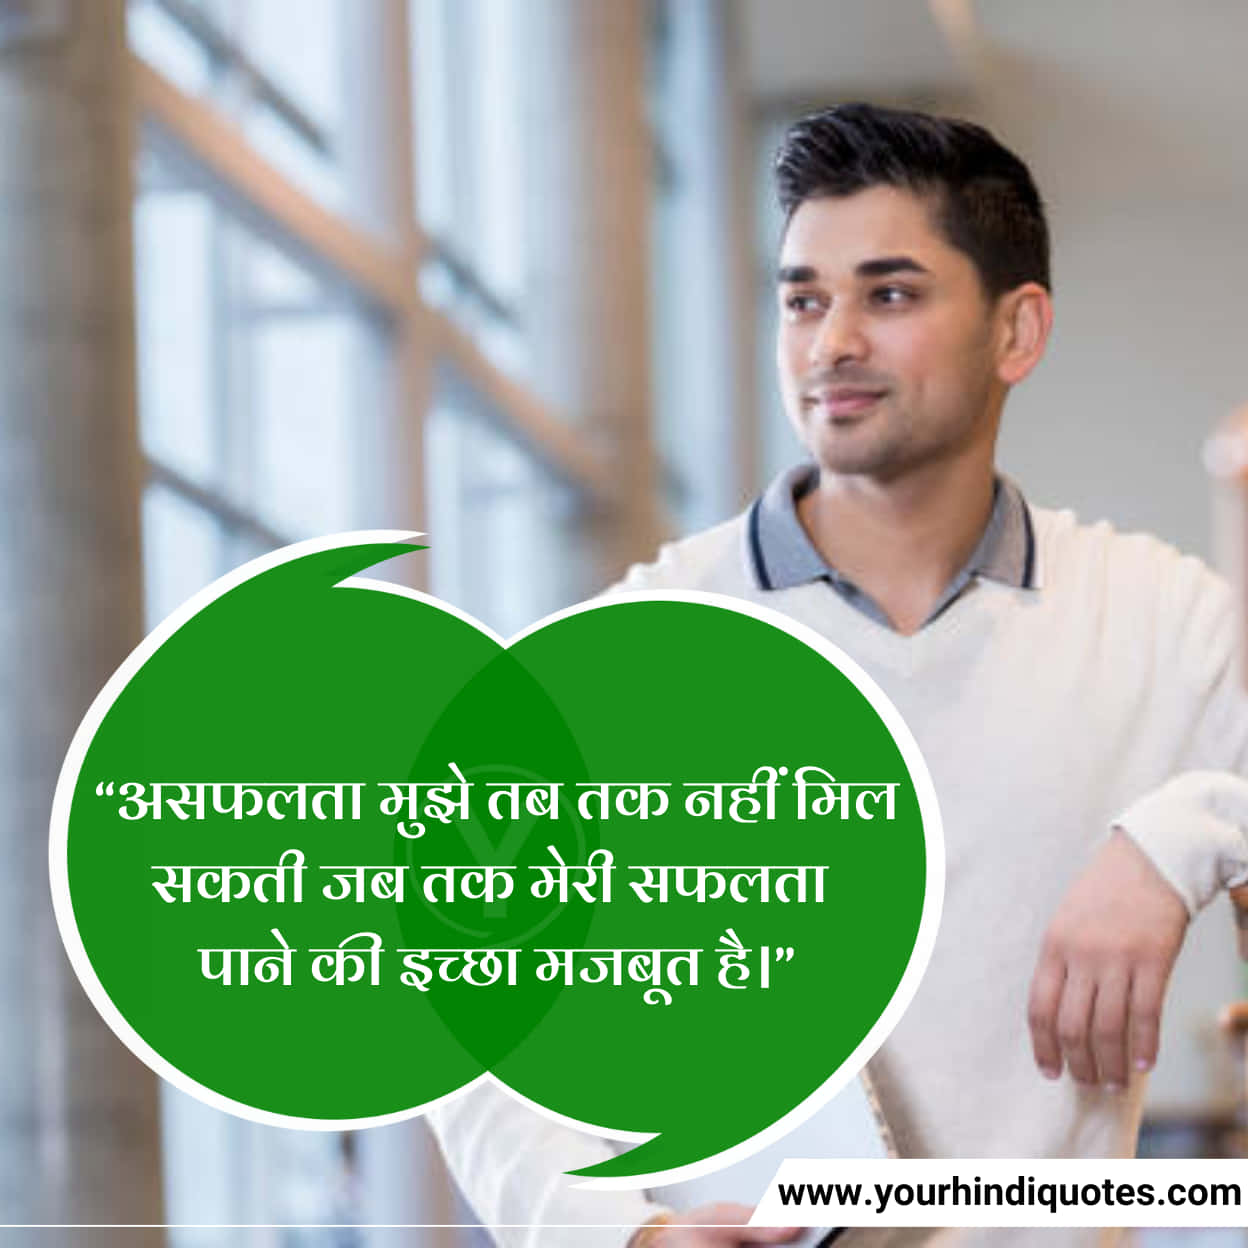 Best Hindi Students Quotes